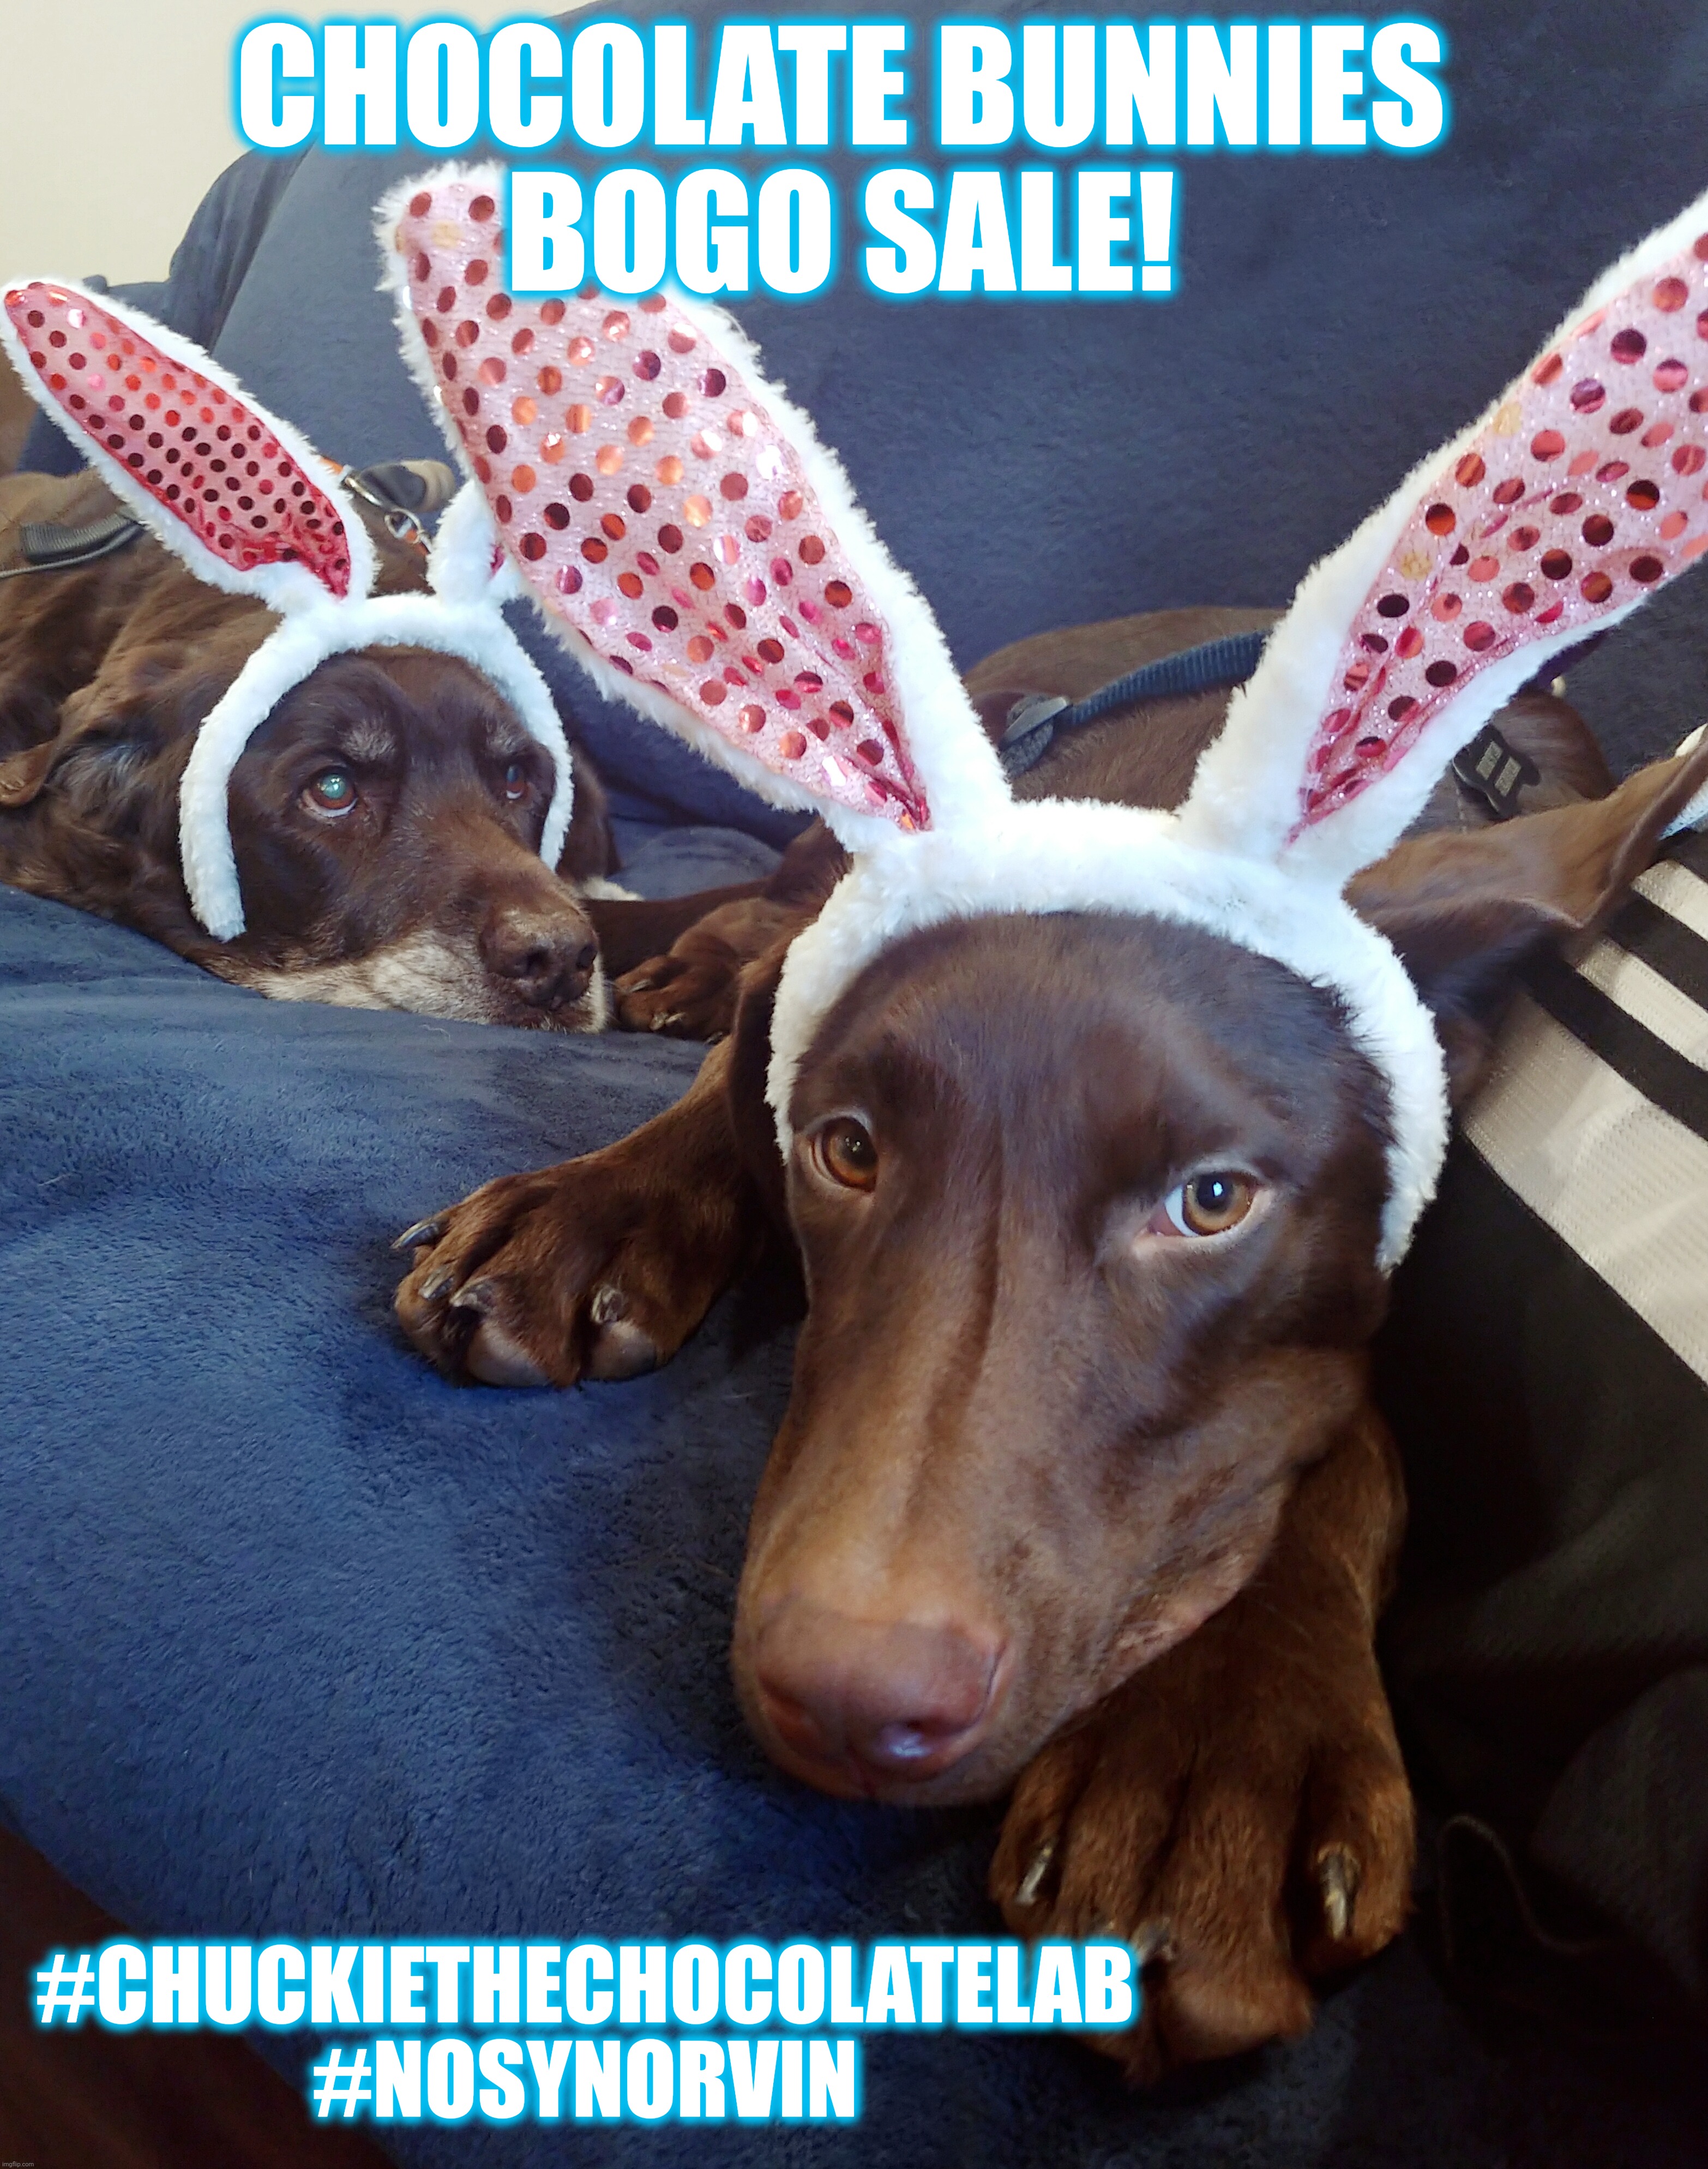 Chocolate Easter Bunnies |  CHOCOLATE BUNNIES 
BOGO SALE! #CHUCKIETHECHOCOLATELAB #NOSYNORVIN | image tagged in easter,dogs,memes,chuckie the chocolate lab,funny,cute | made w/ Imgflip meme maker